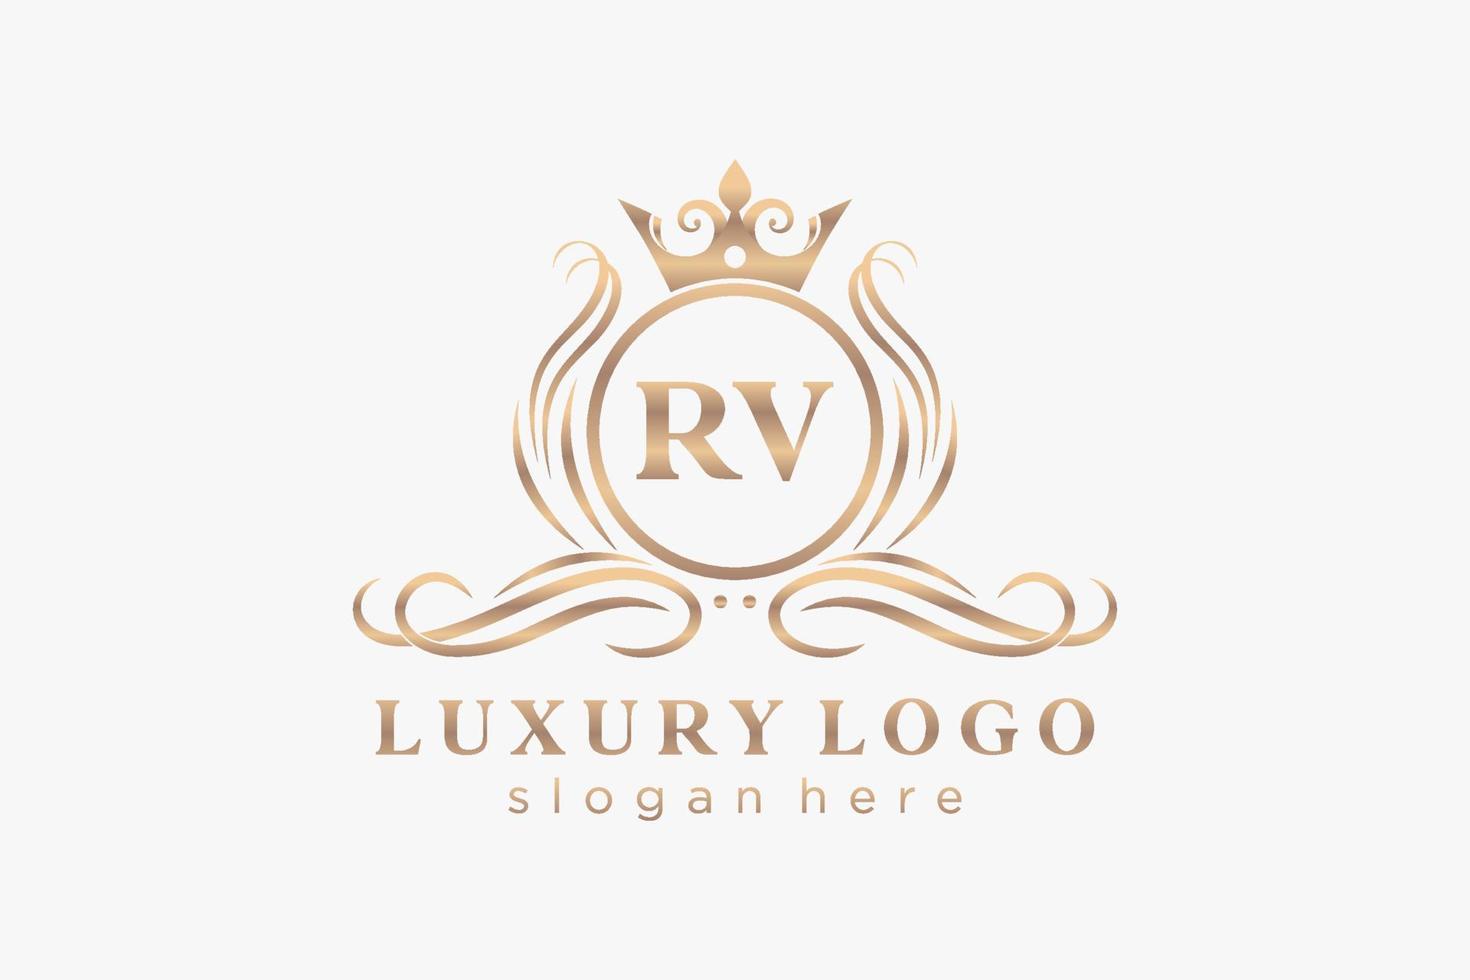 Initial RV Letter Royal Luxury Logo template in vector art for Restaurant, Royalty, Boutique, Cafe, Hotel, Heraldic, Jewelry, Fashion and other vector illustration.